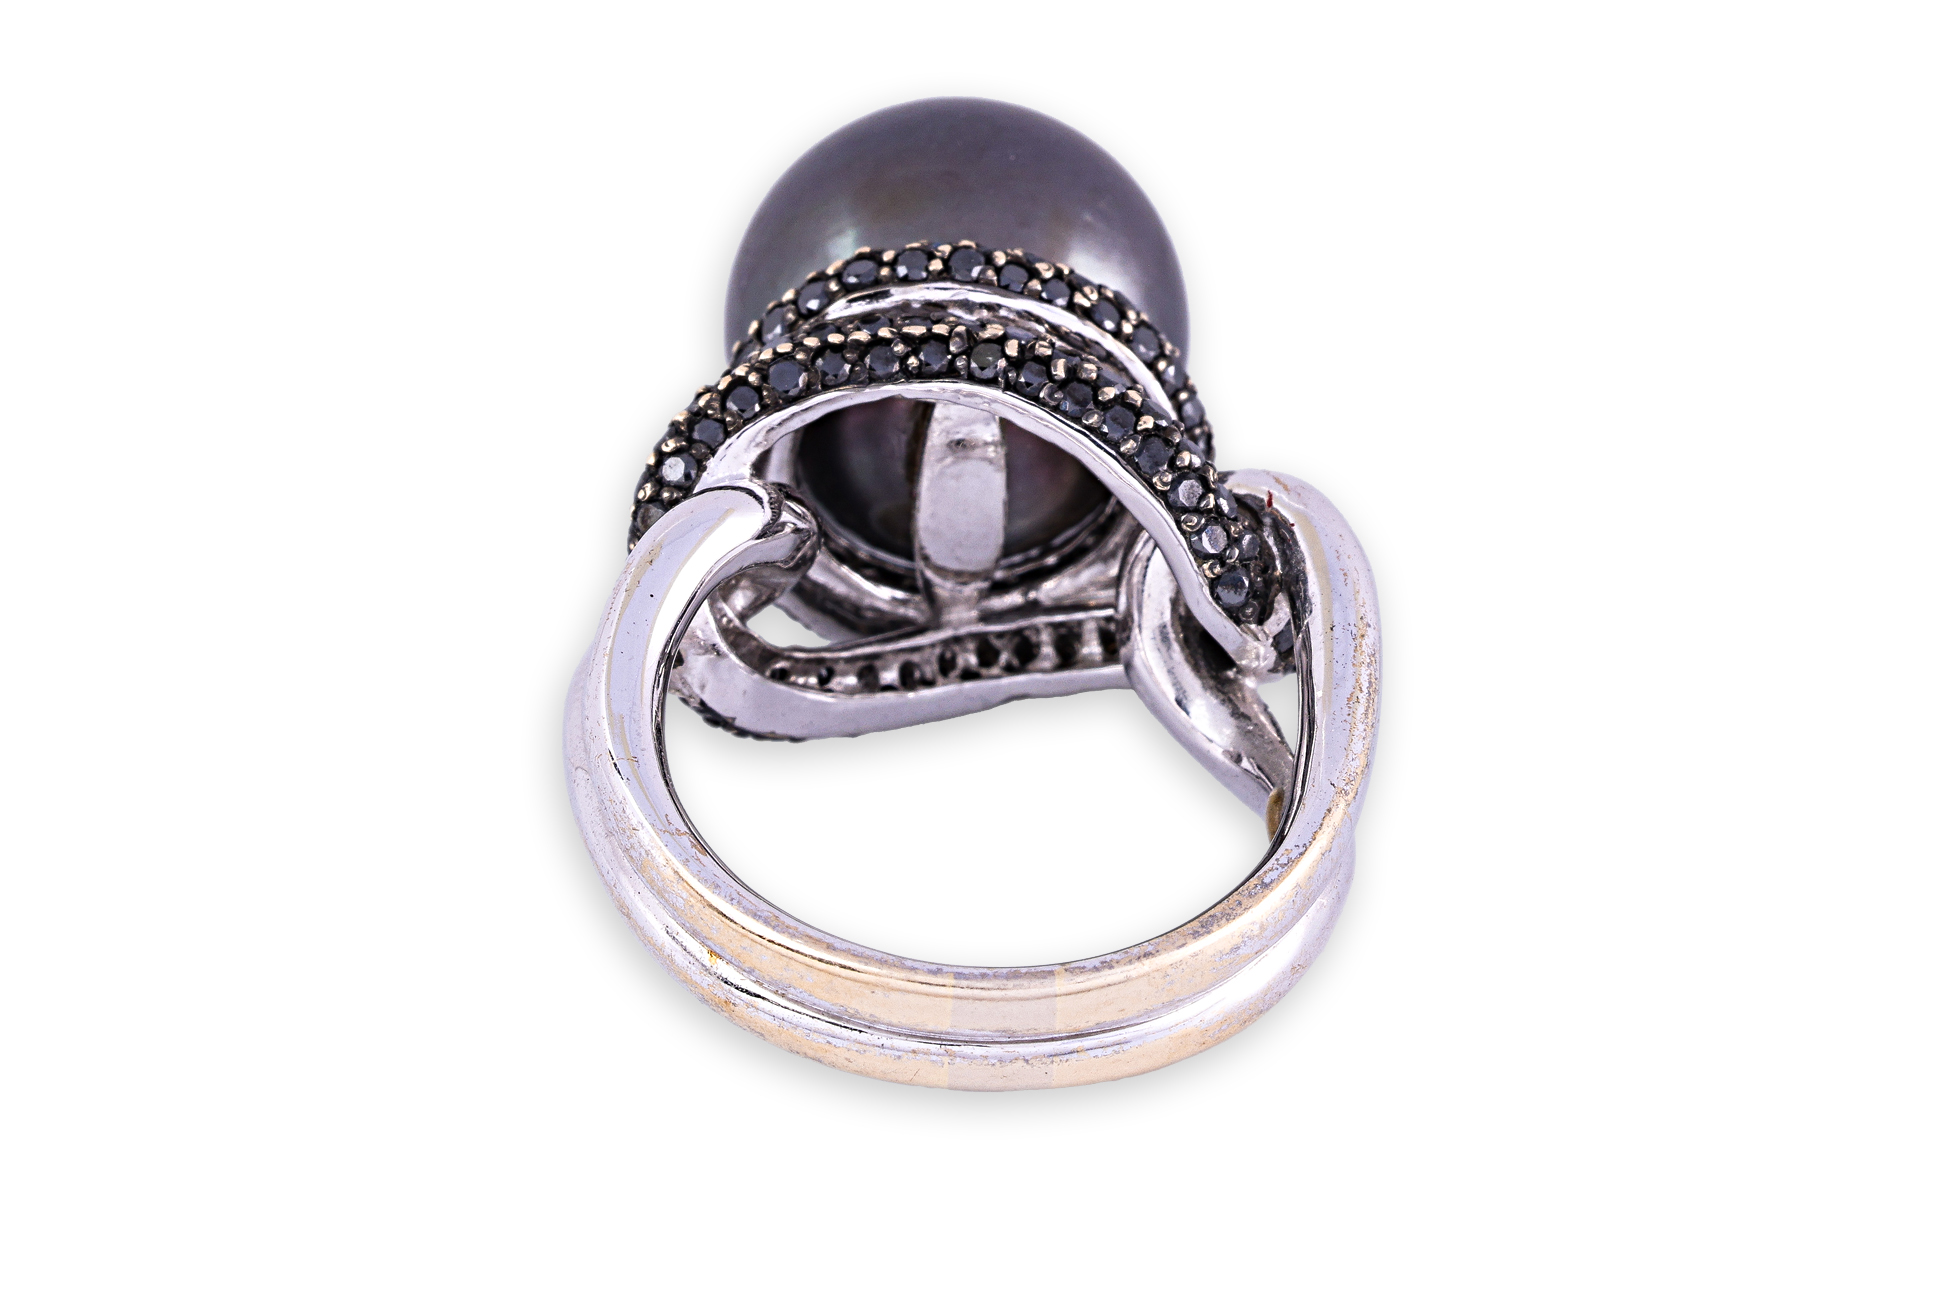 A TAHITIAN CULTURED PEARL AND BLACK DIAMOND RING - Image 3 of 4